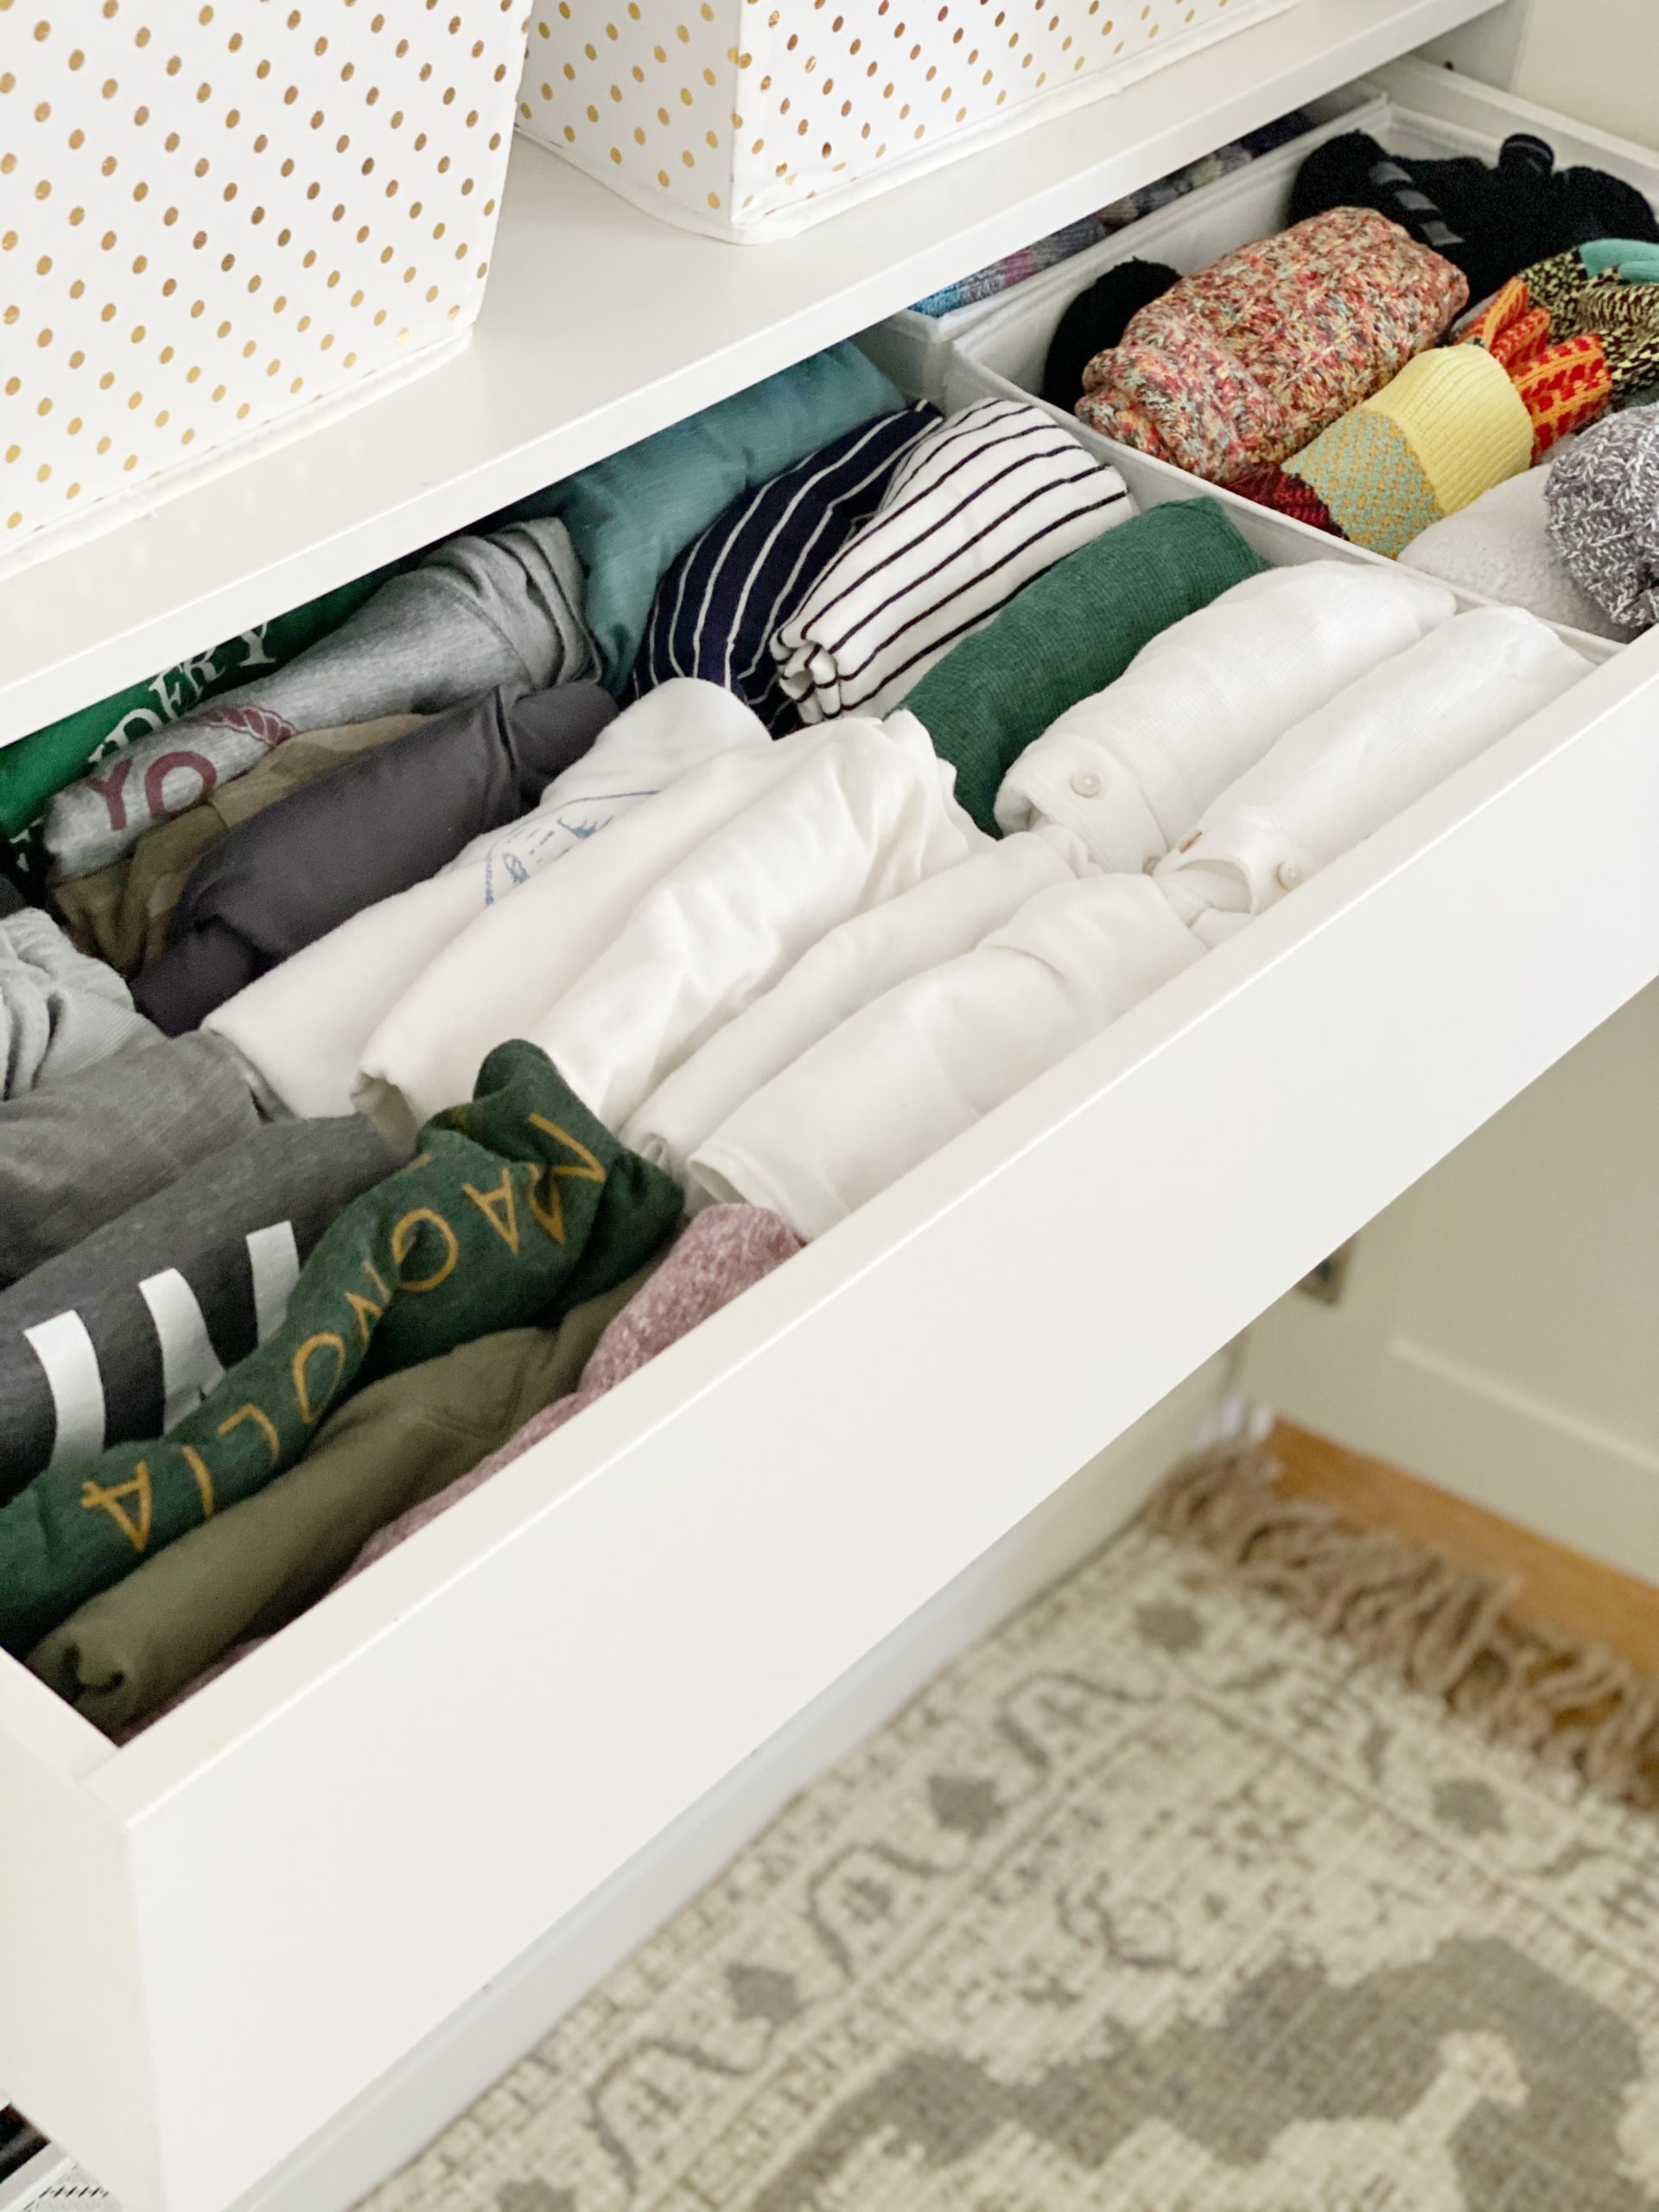 Why we got rid of our closet and went with an Ikea PAX Wardrobe System